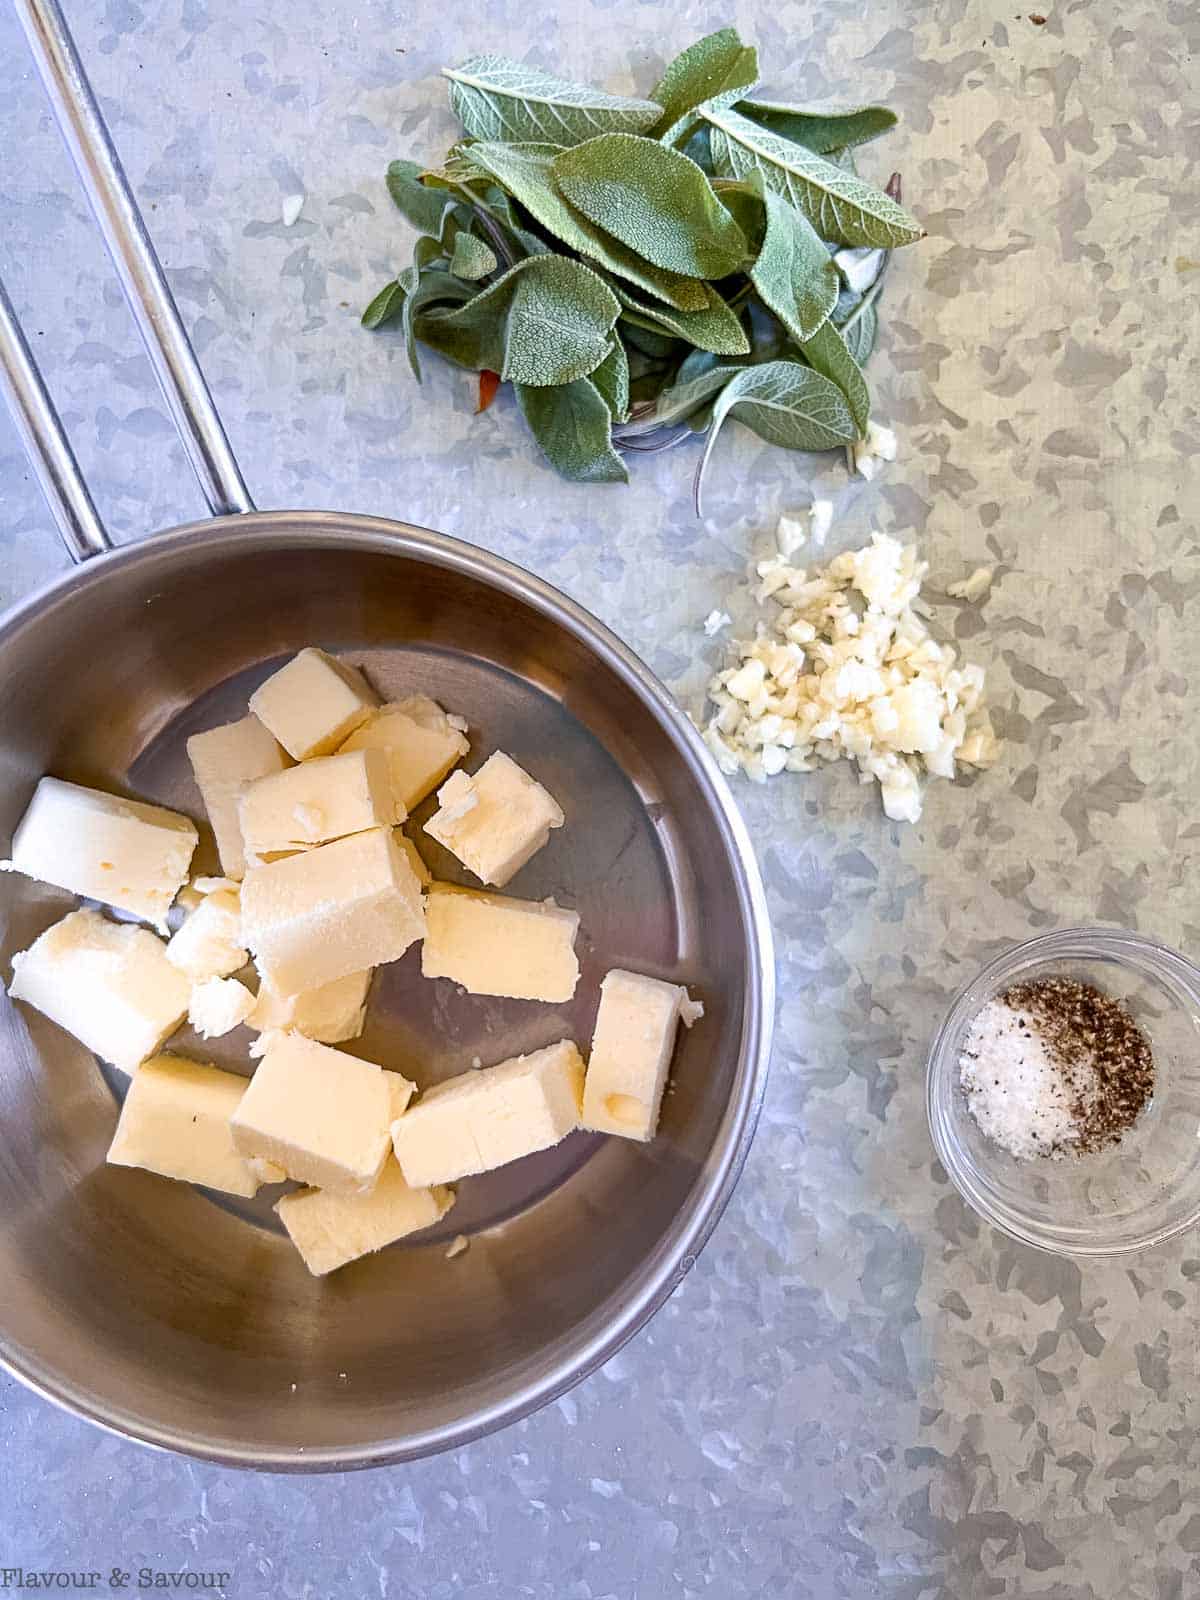 Ingredients for browned butter sage sauce: unsalted butter, sage leaves, garlic and salt and pepper.